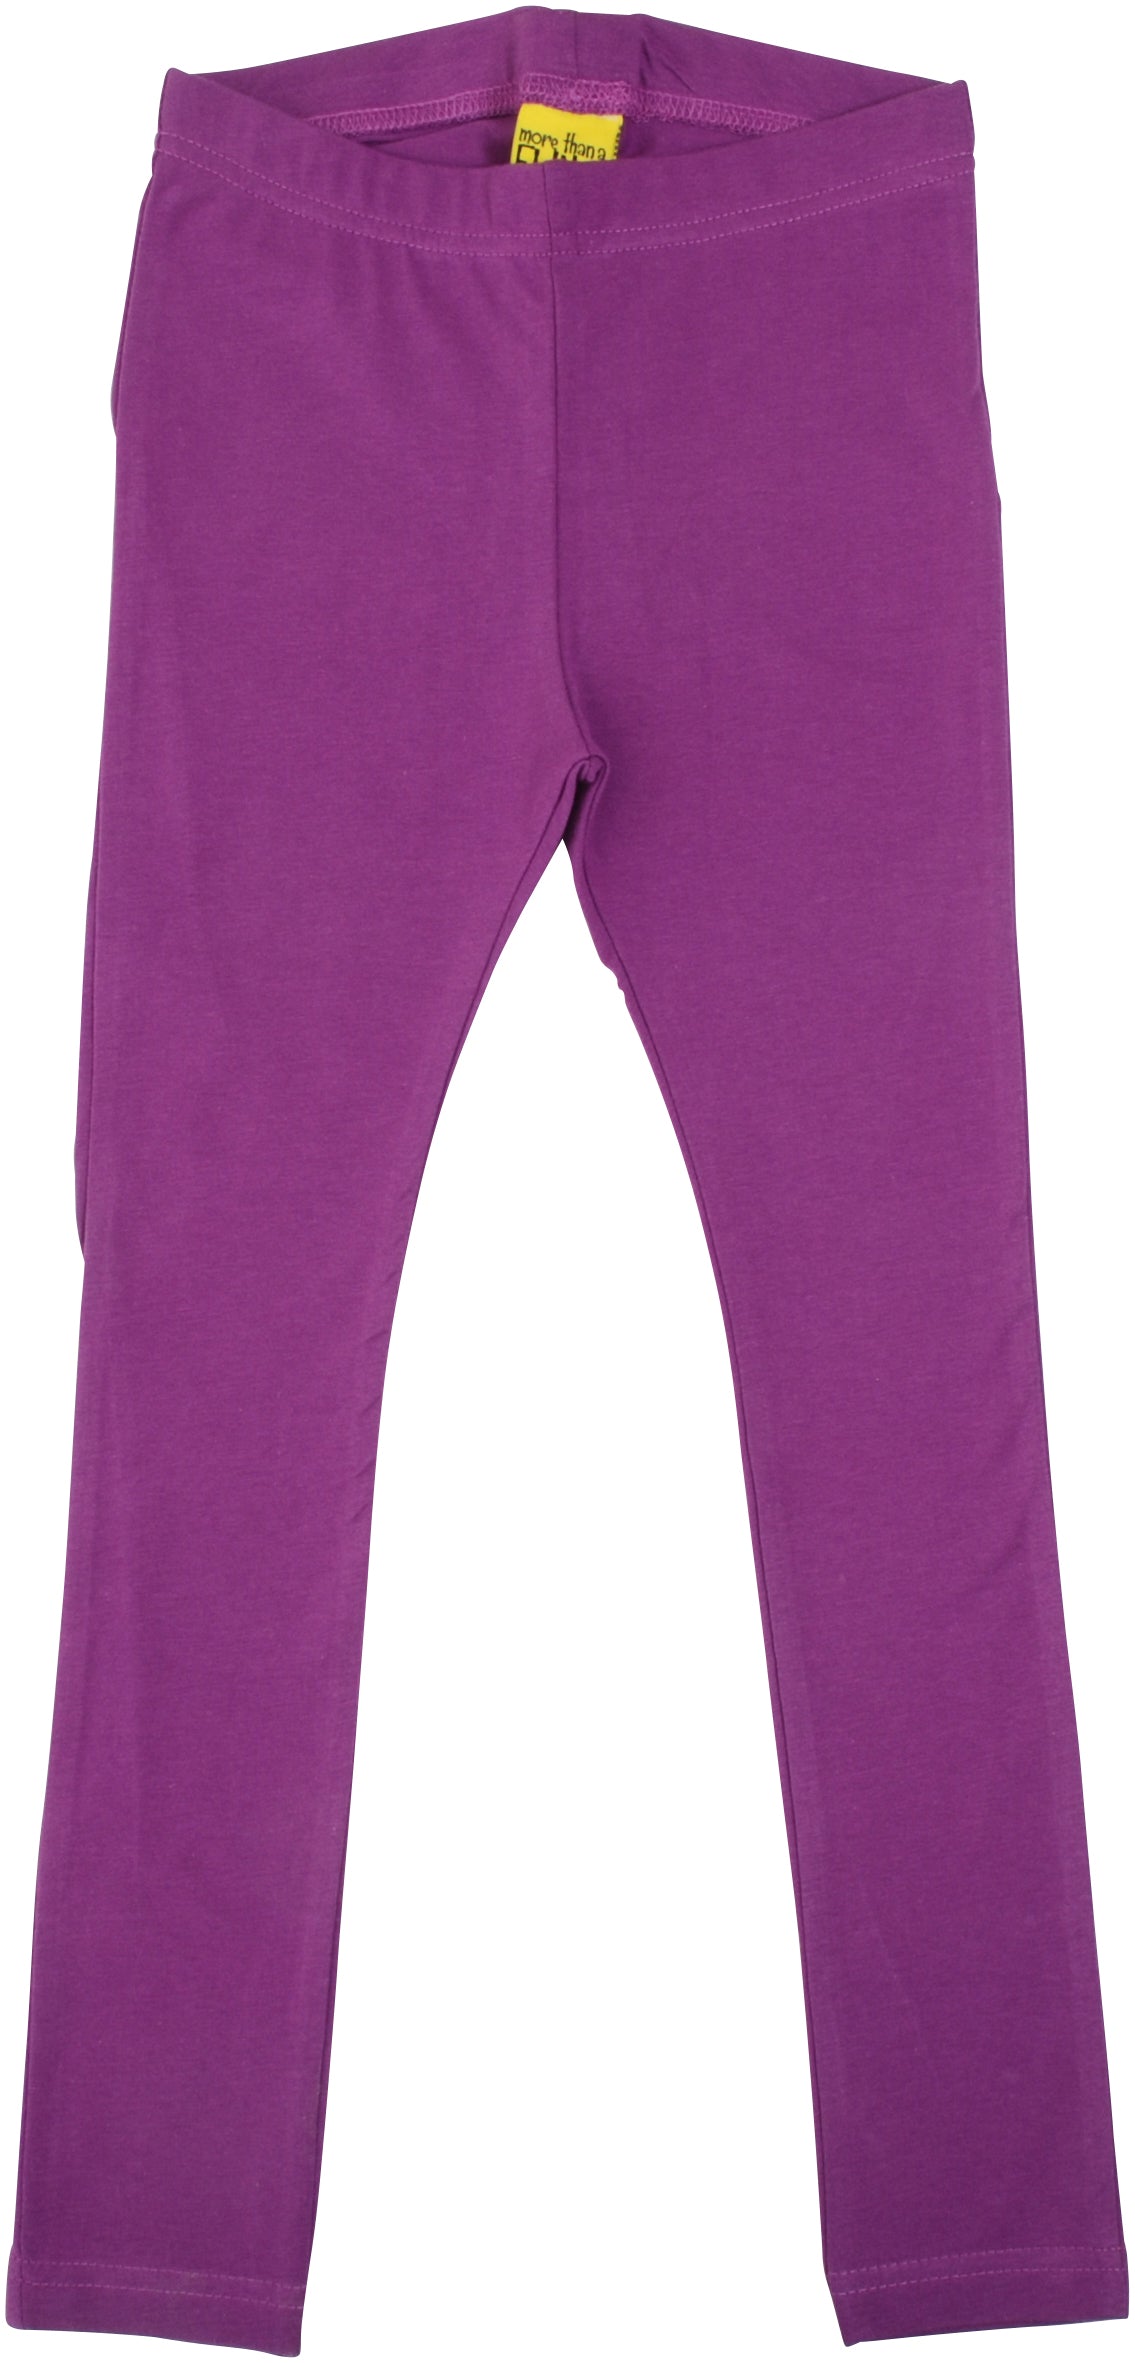 More Than A Fling Leggings Bright Violet - Paars